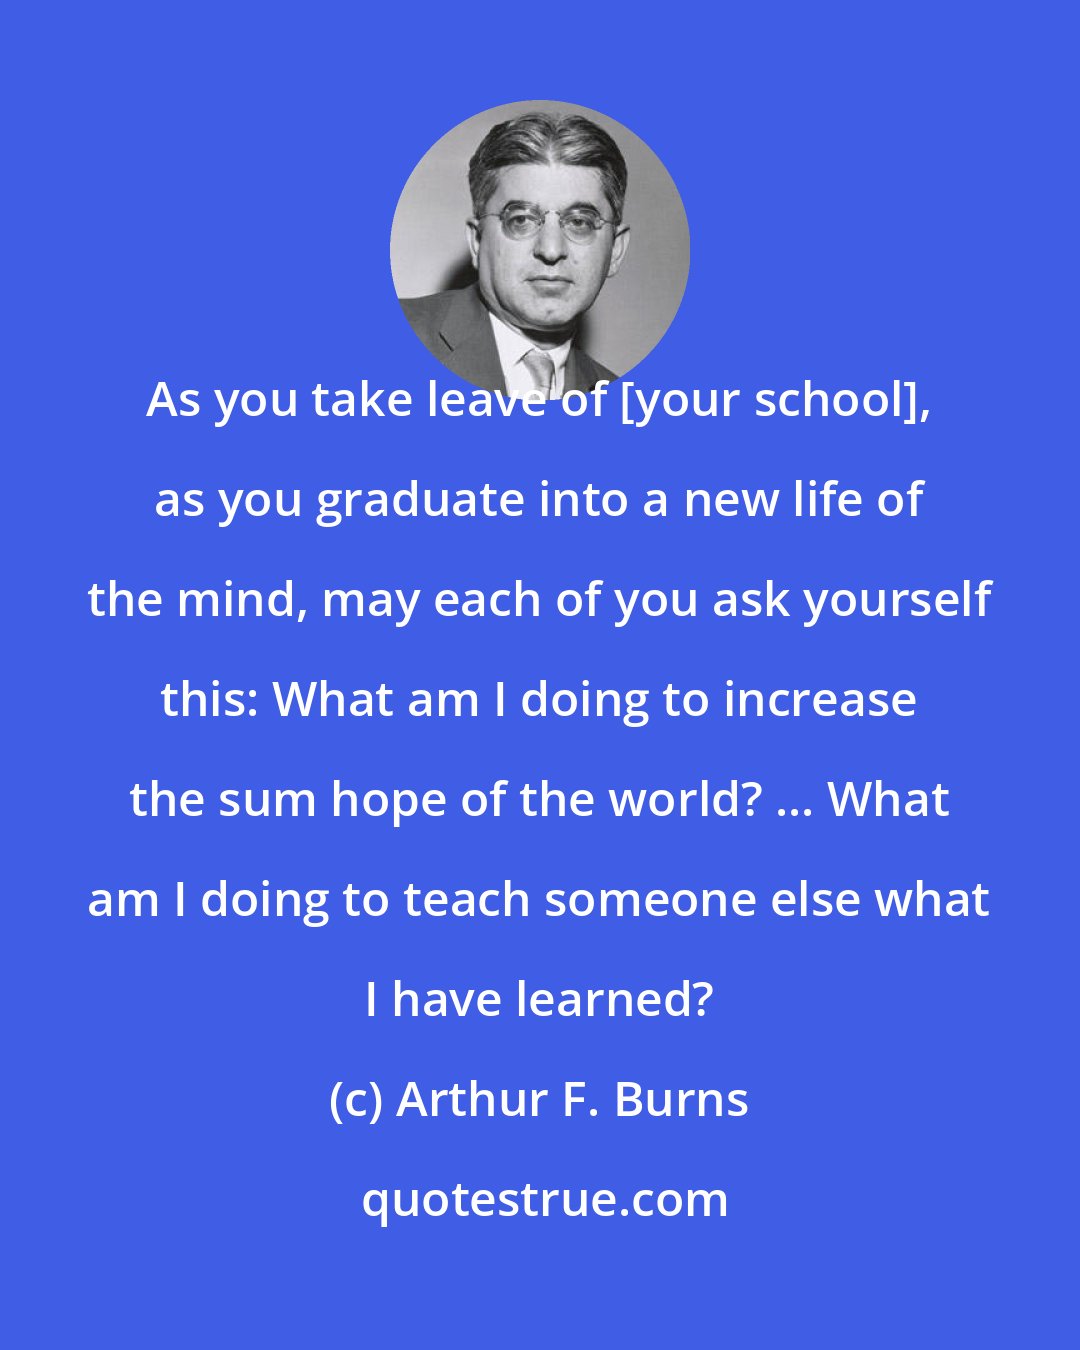 Arthur F. Burns: As you take leave of [your school], as you graduate into a new life of the mind, may each of you ask yourself this: What am I doing to increase the sum hope of the world? ... What am I doing to teach someone else what I have learned?